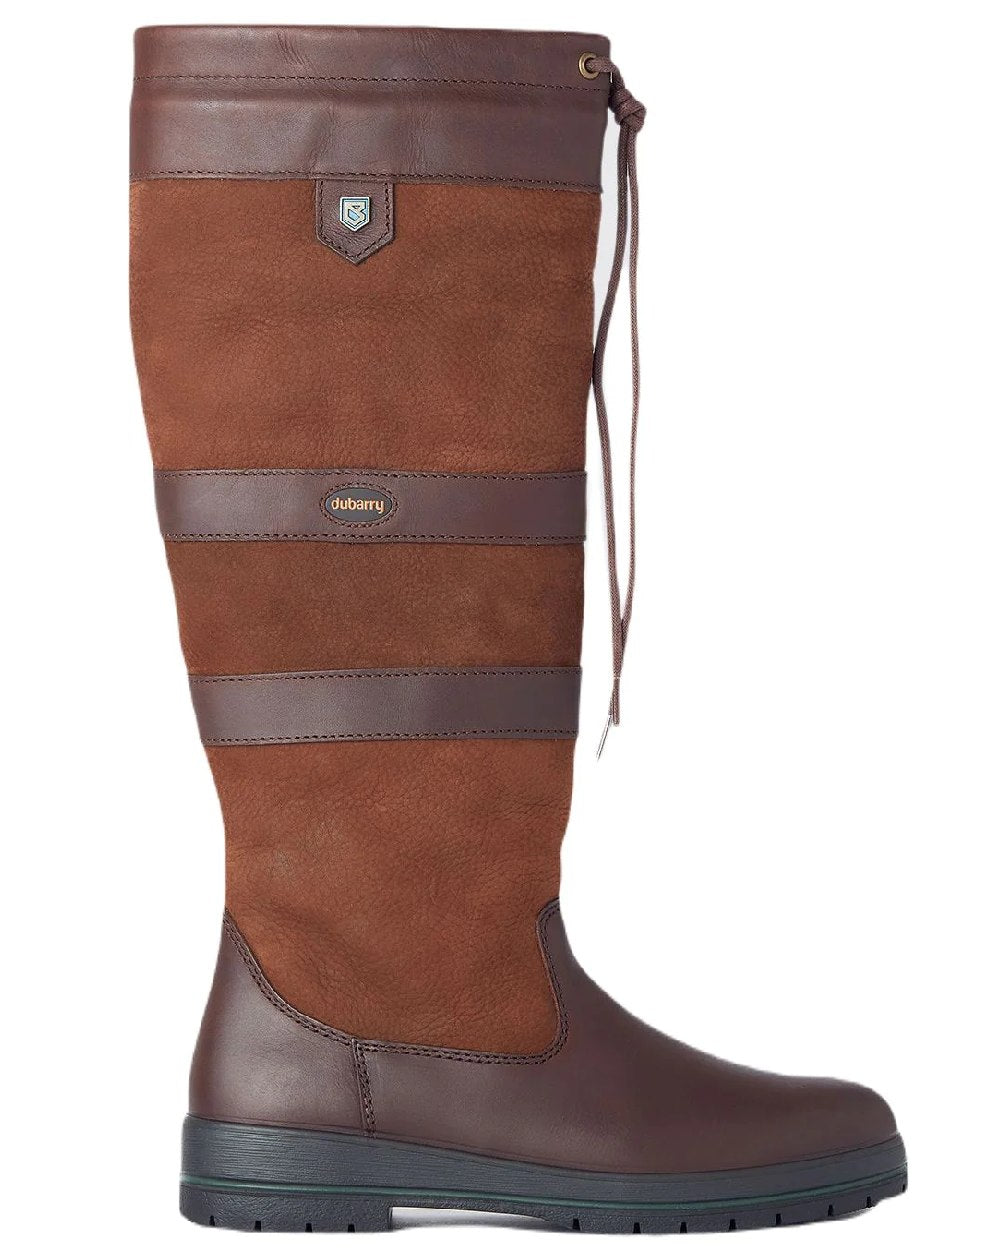 Dubarry Galway Country Boots in Walnut 